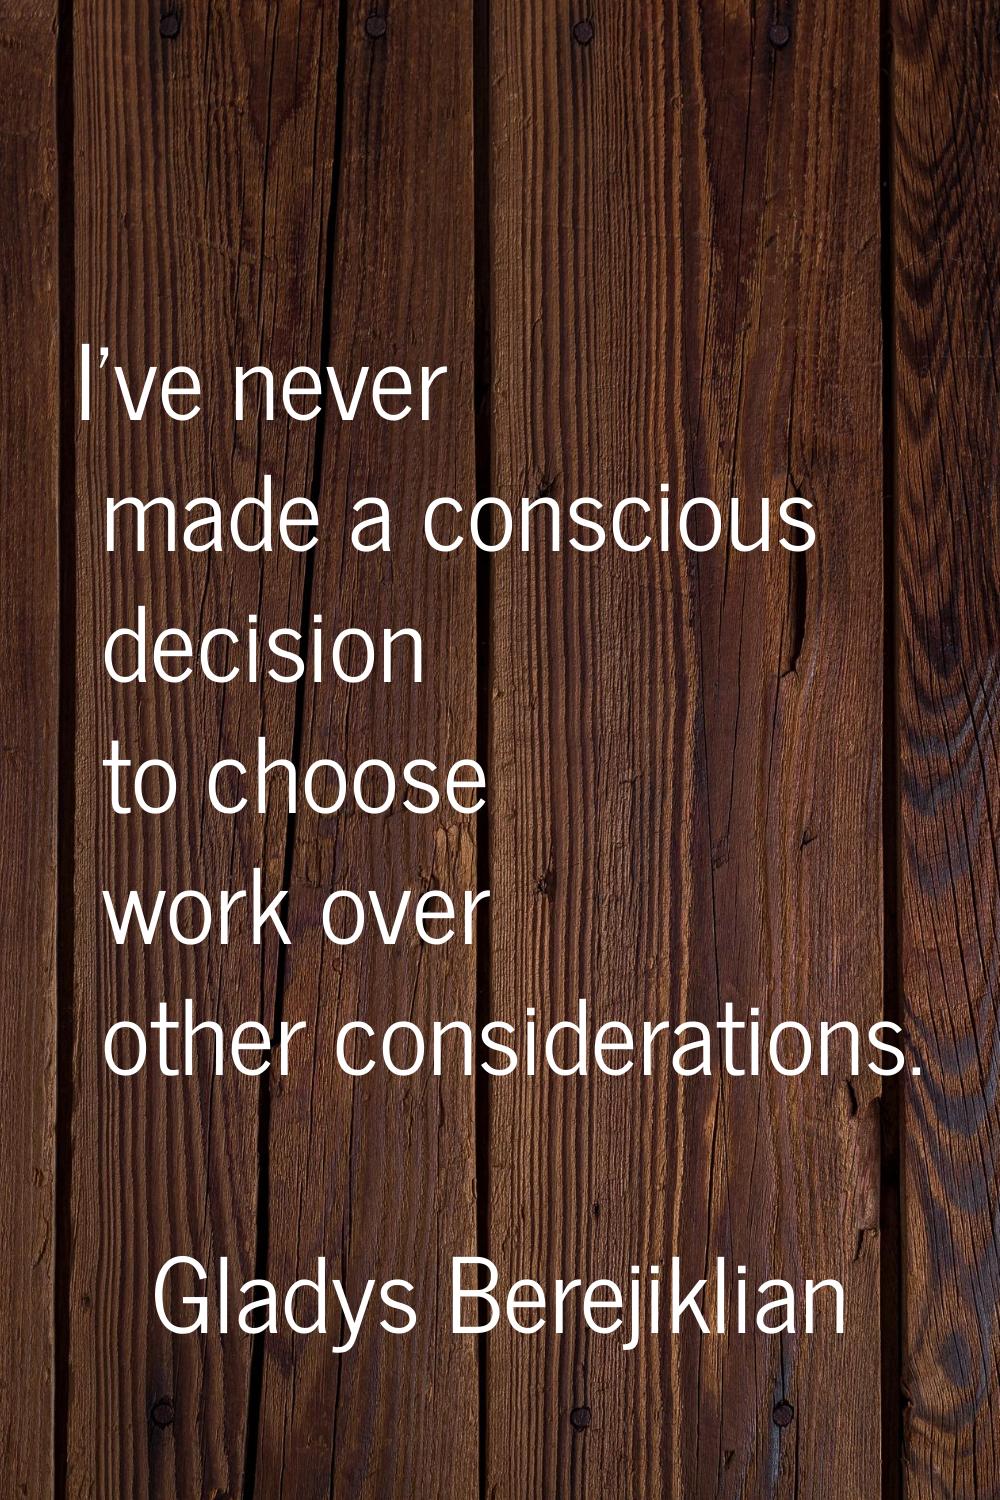 I've never made a conscious decision to choose work over other considerations.